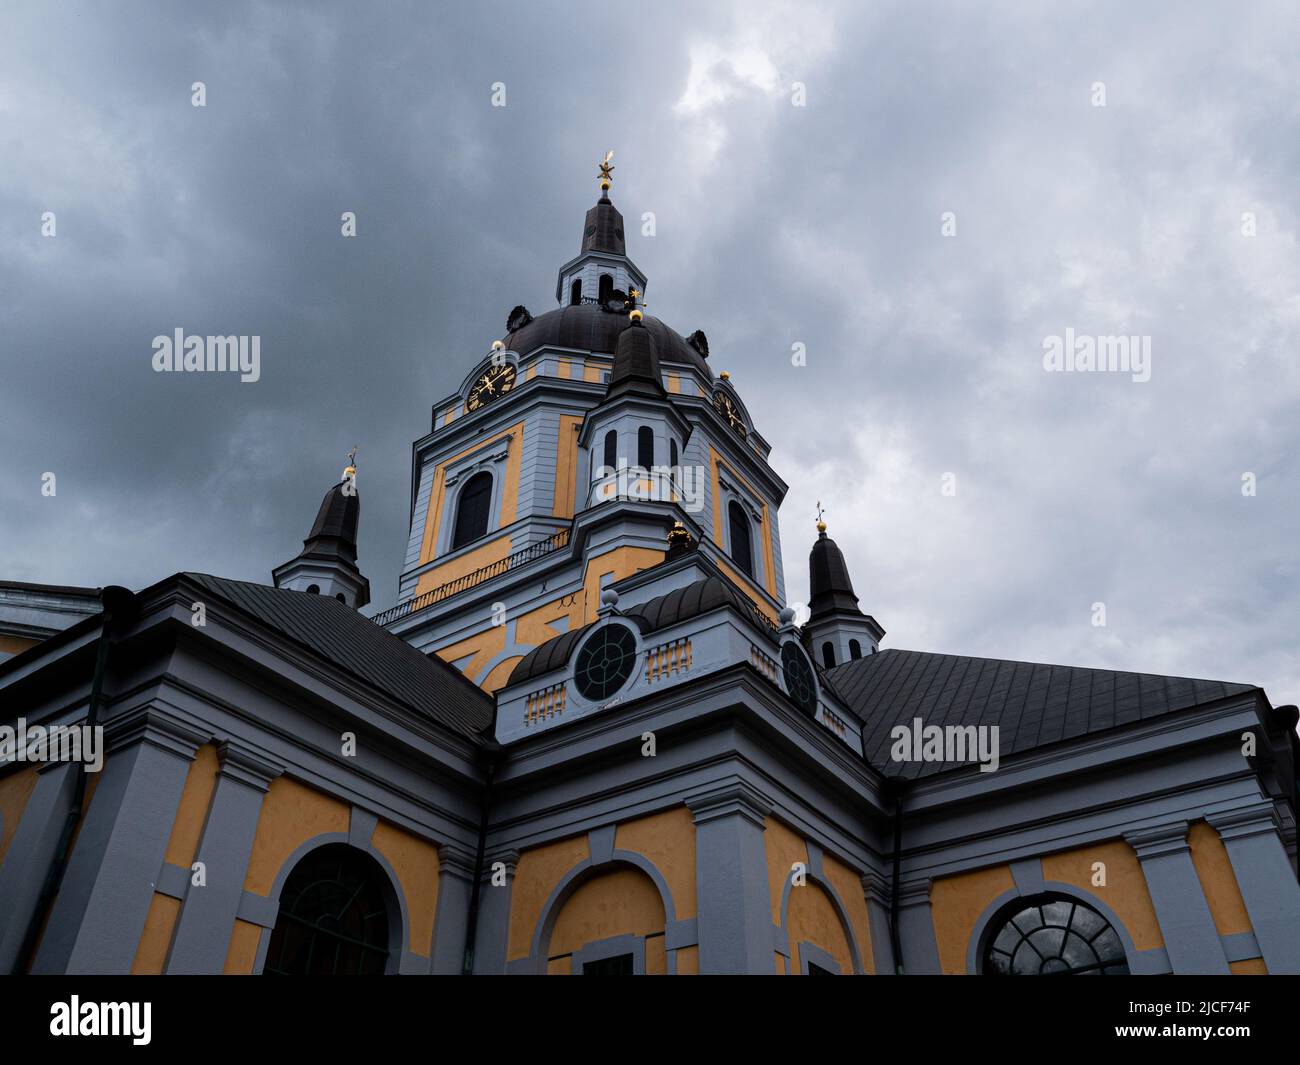 Big church from frog perspective in Stockholm, Sweden. Stock Photo